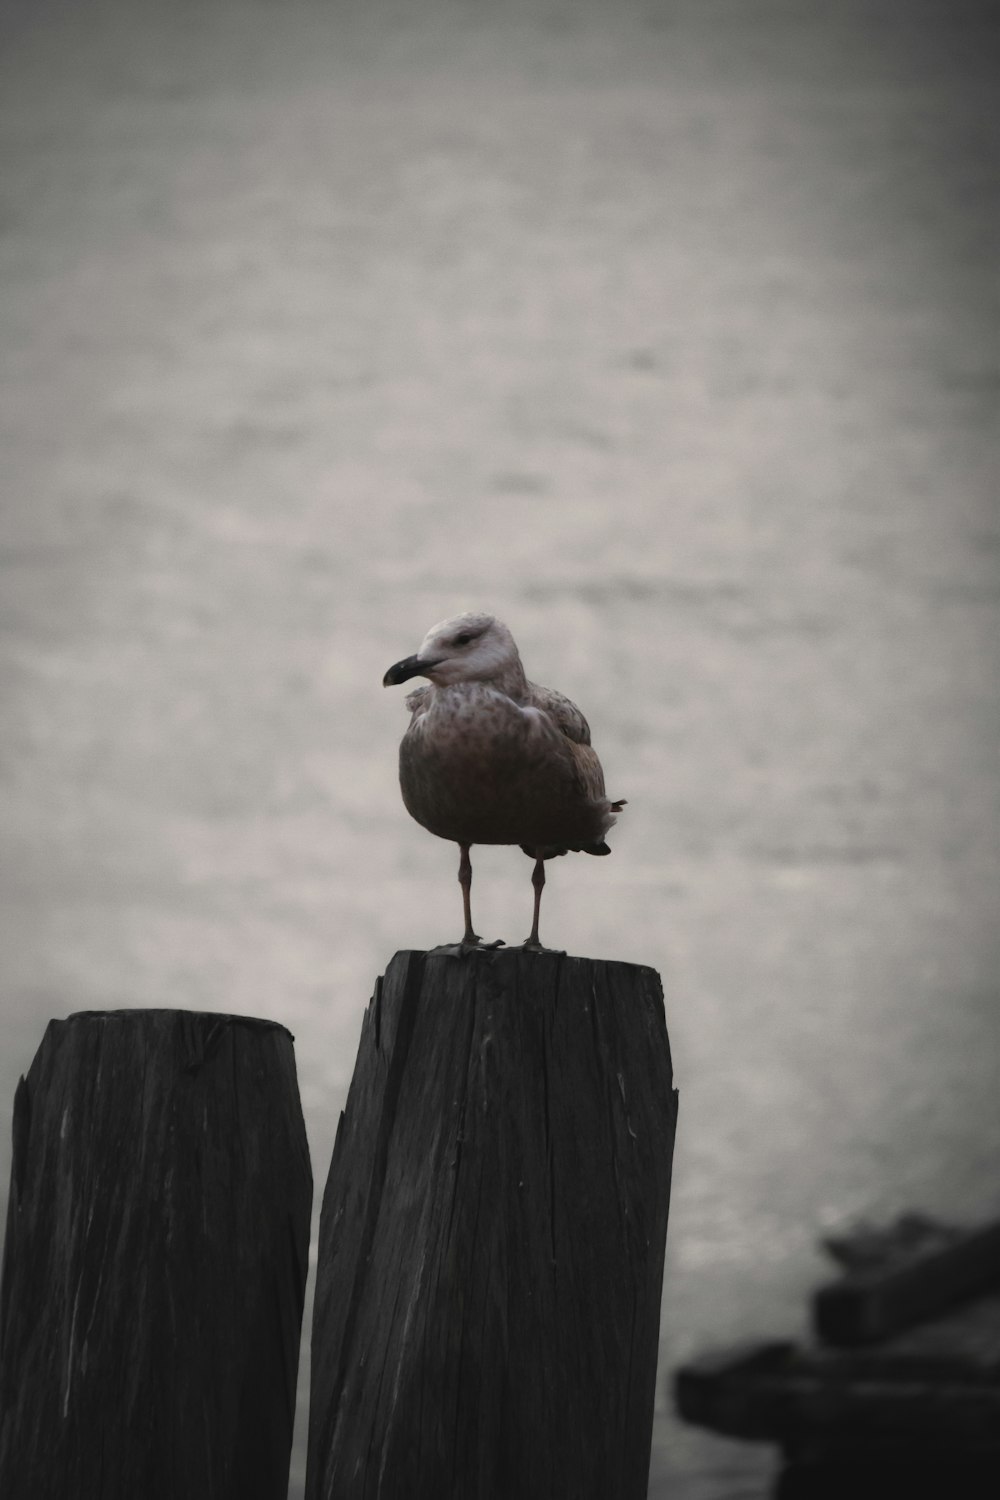 a seagull sitting on a wooden post by the water